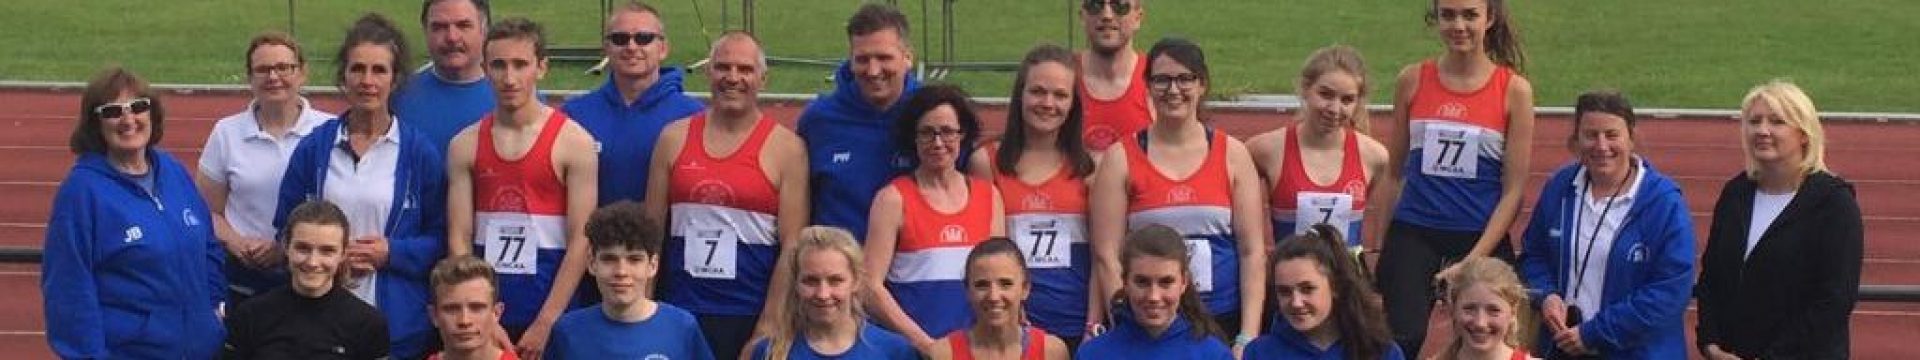 23rd May – Staffordshire Championship Track & Field